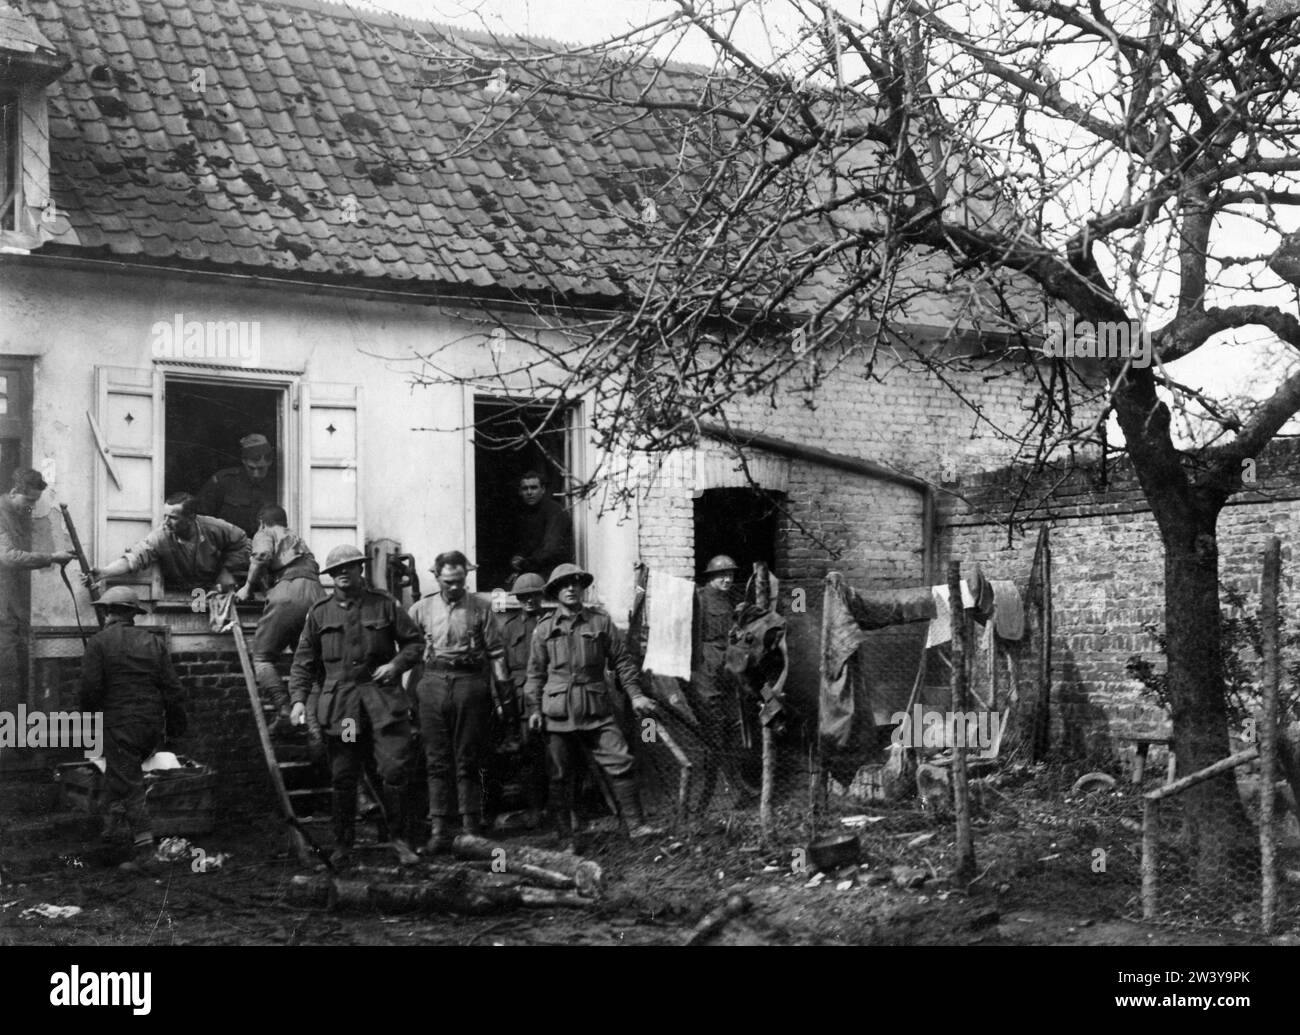 Official photograph taken on the British Western Front showing soldiers cleaning clothes and equipment Stock Photo